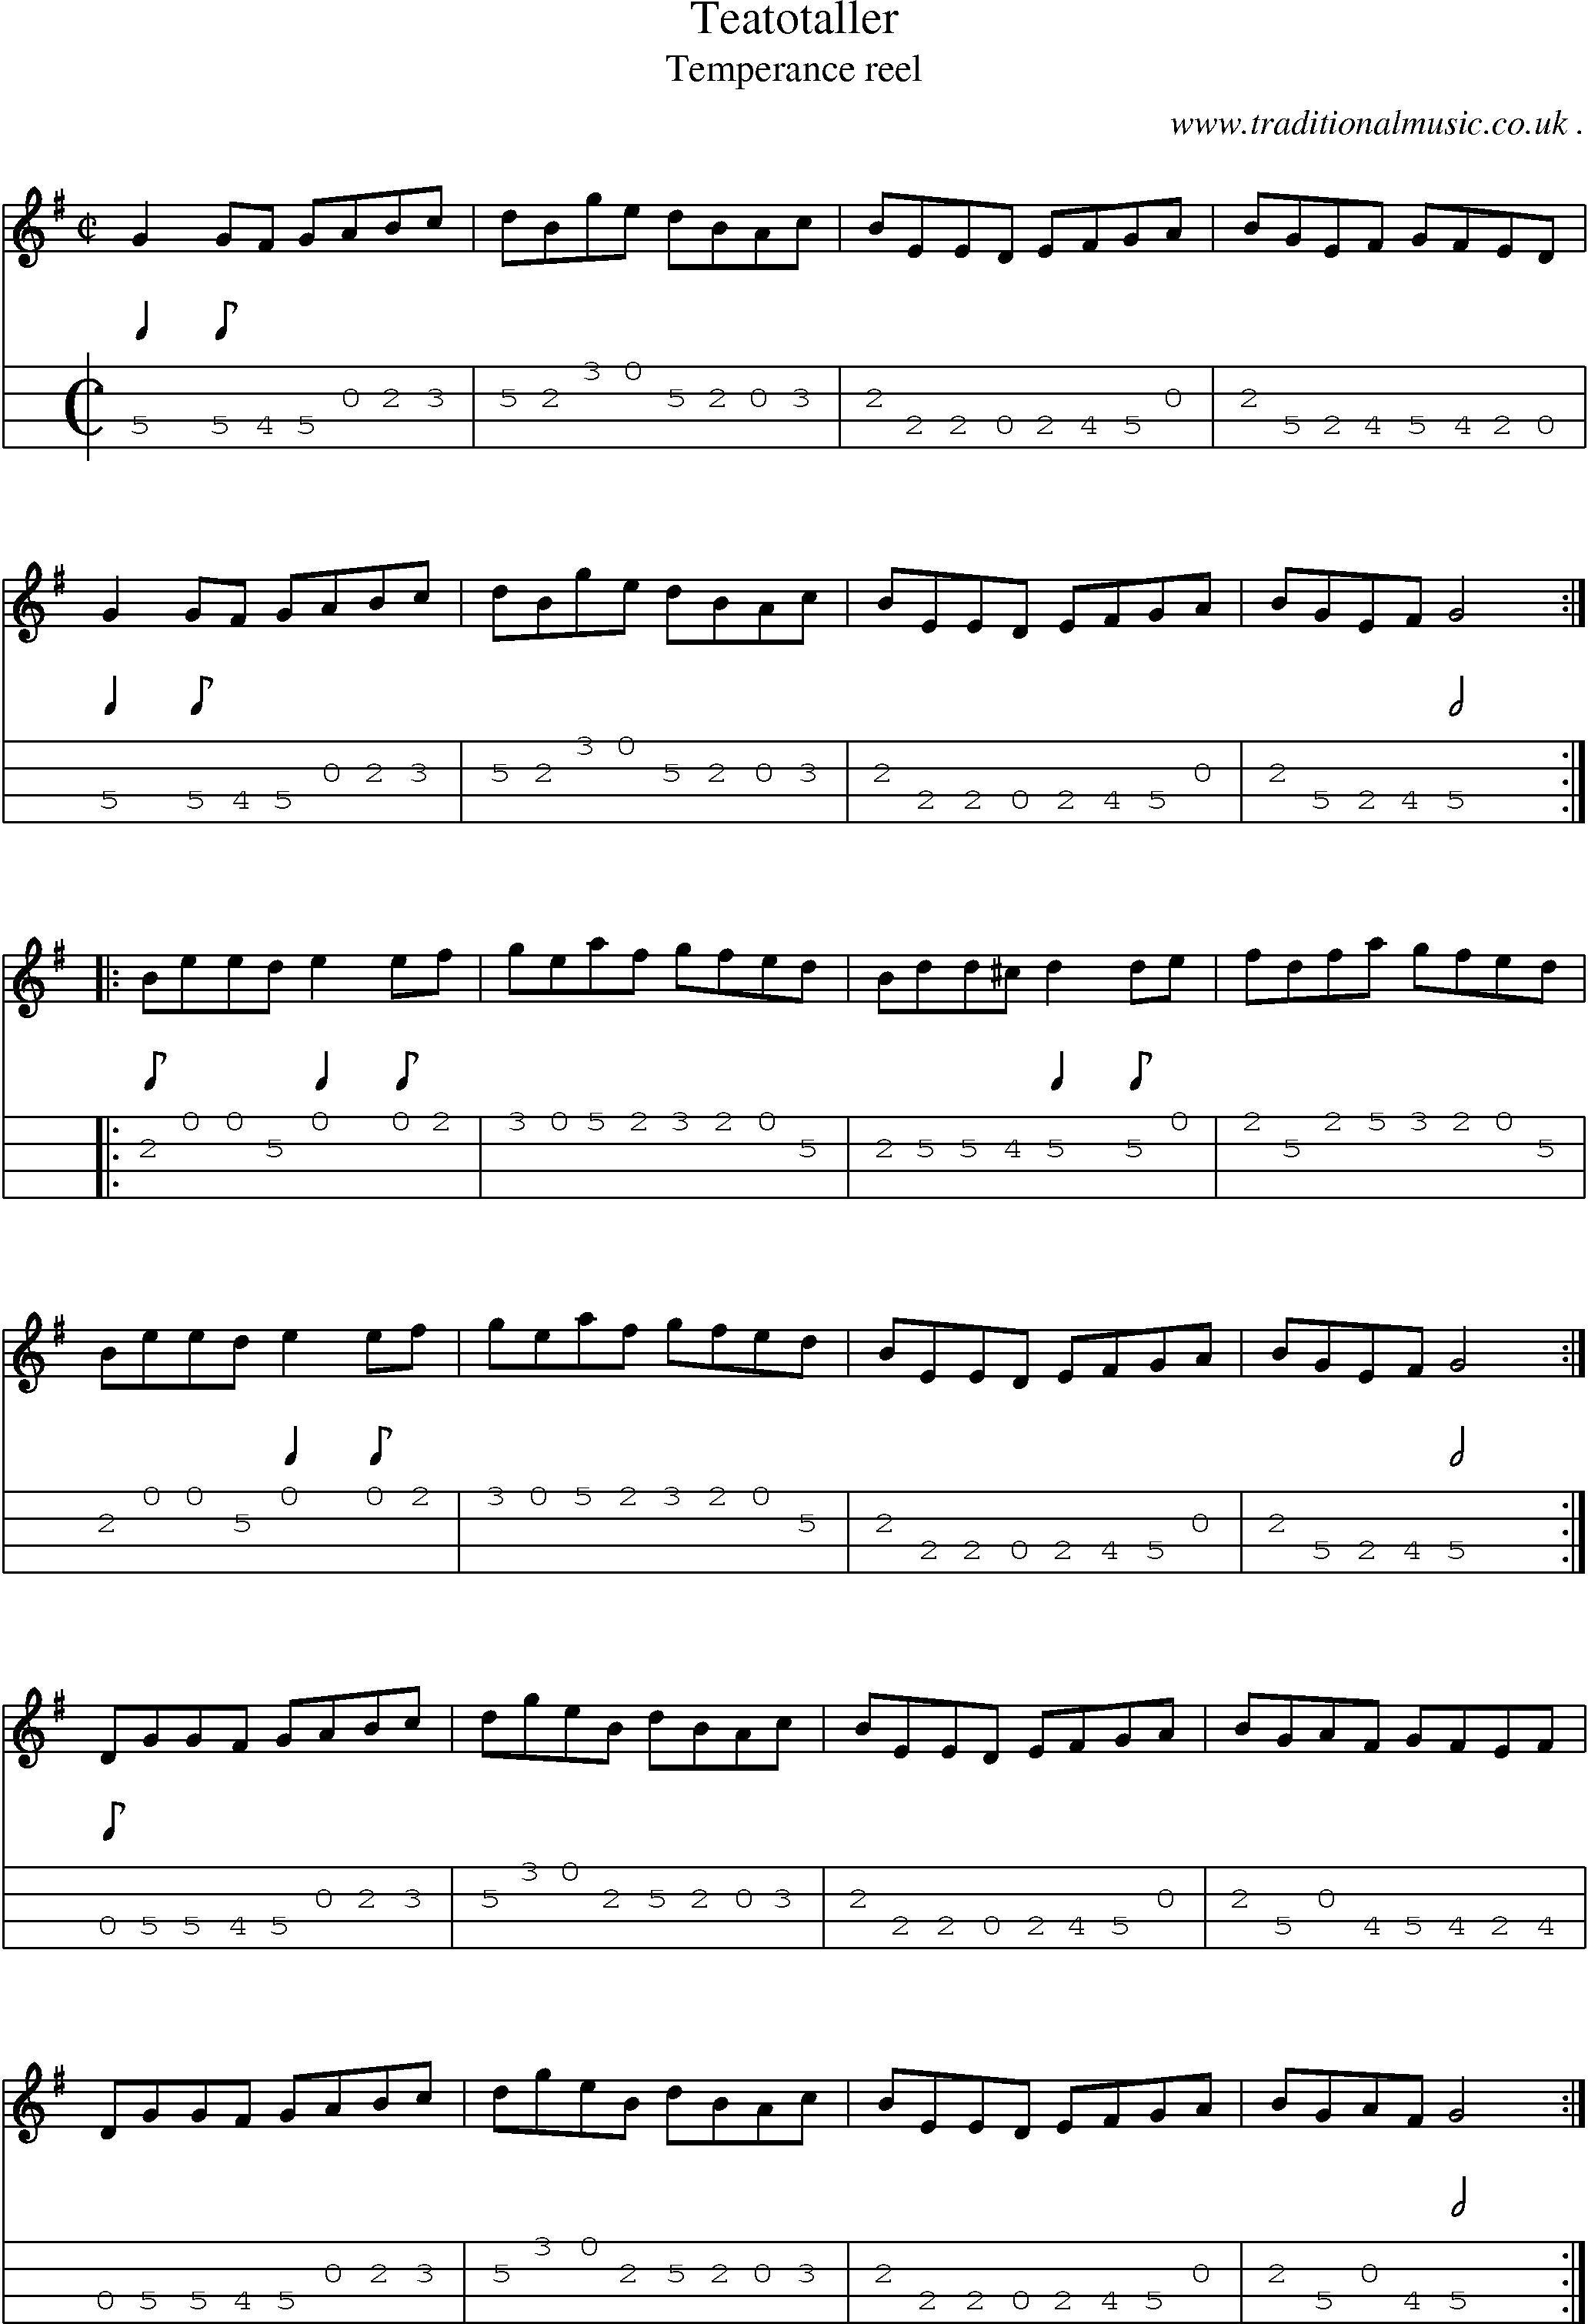 Sheet-Music and Mandolin Tabs for Teatotaller